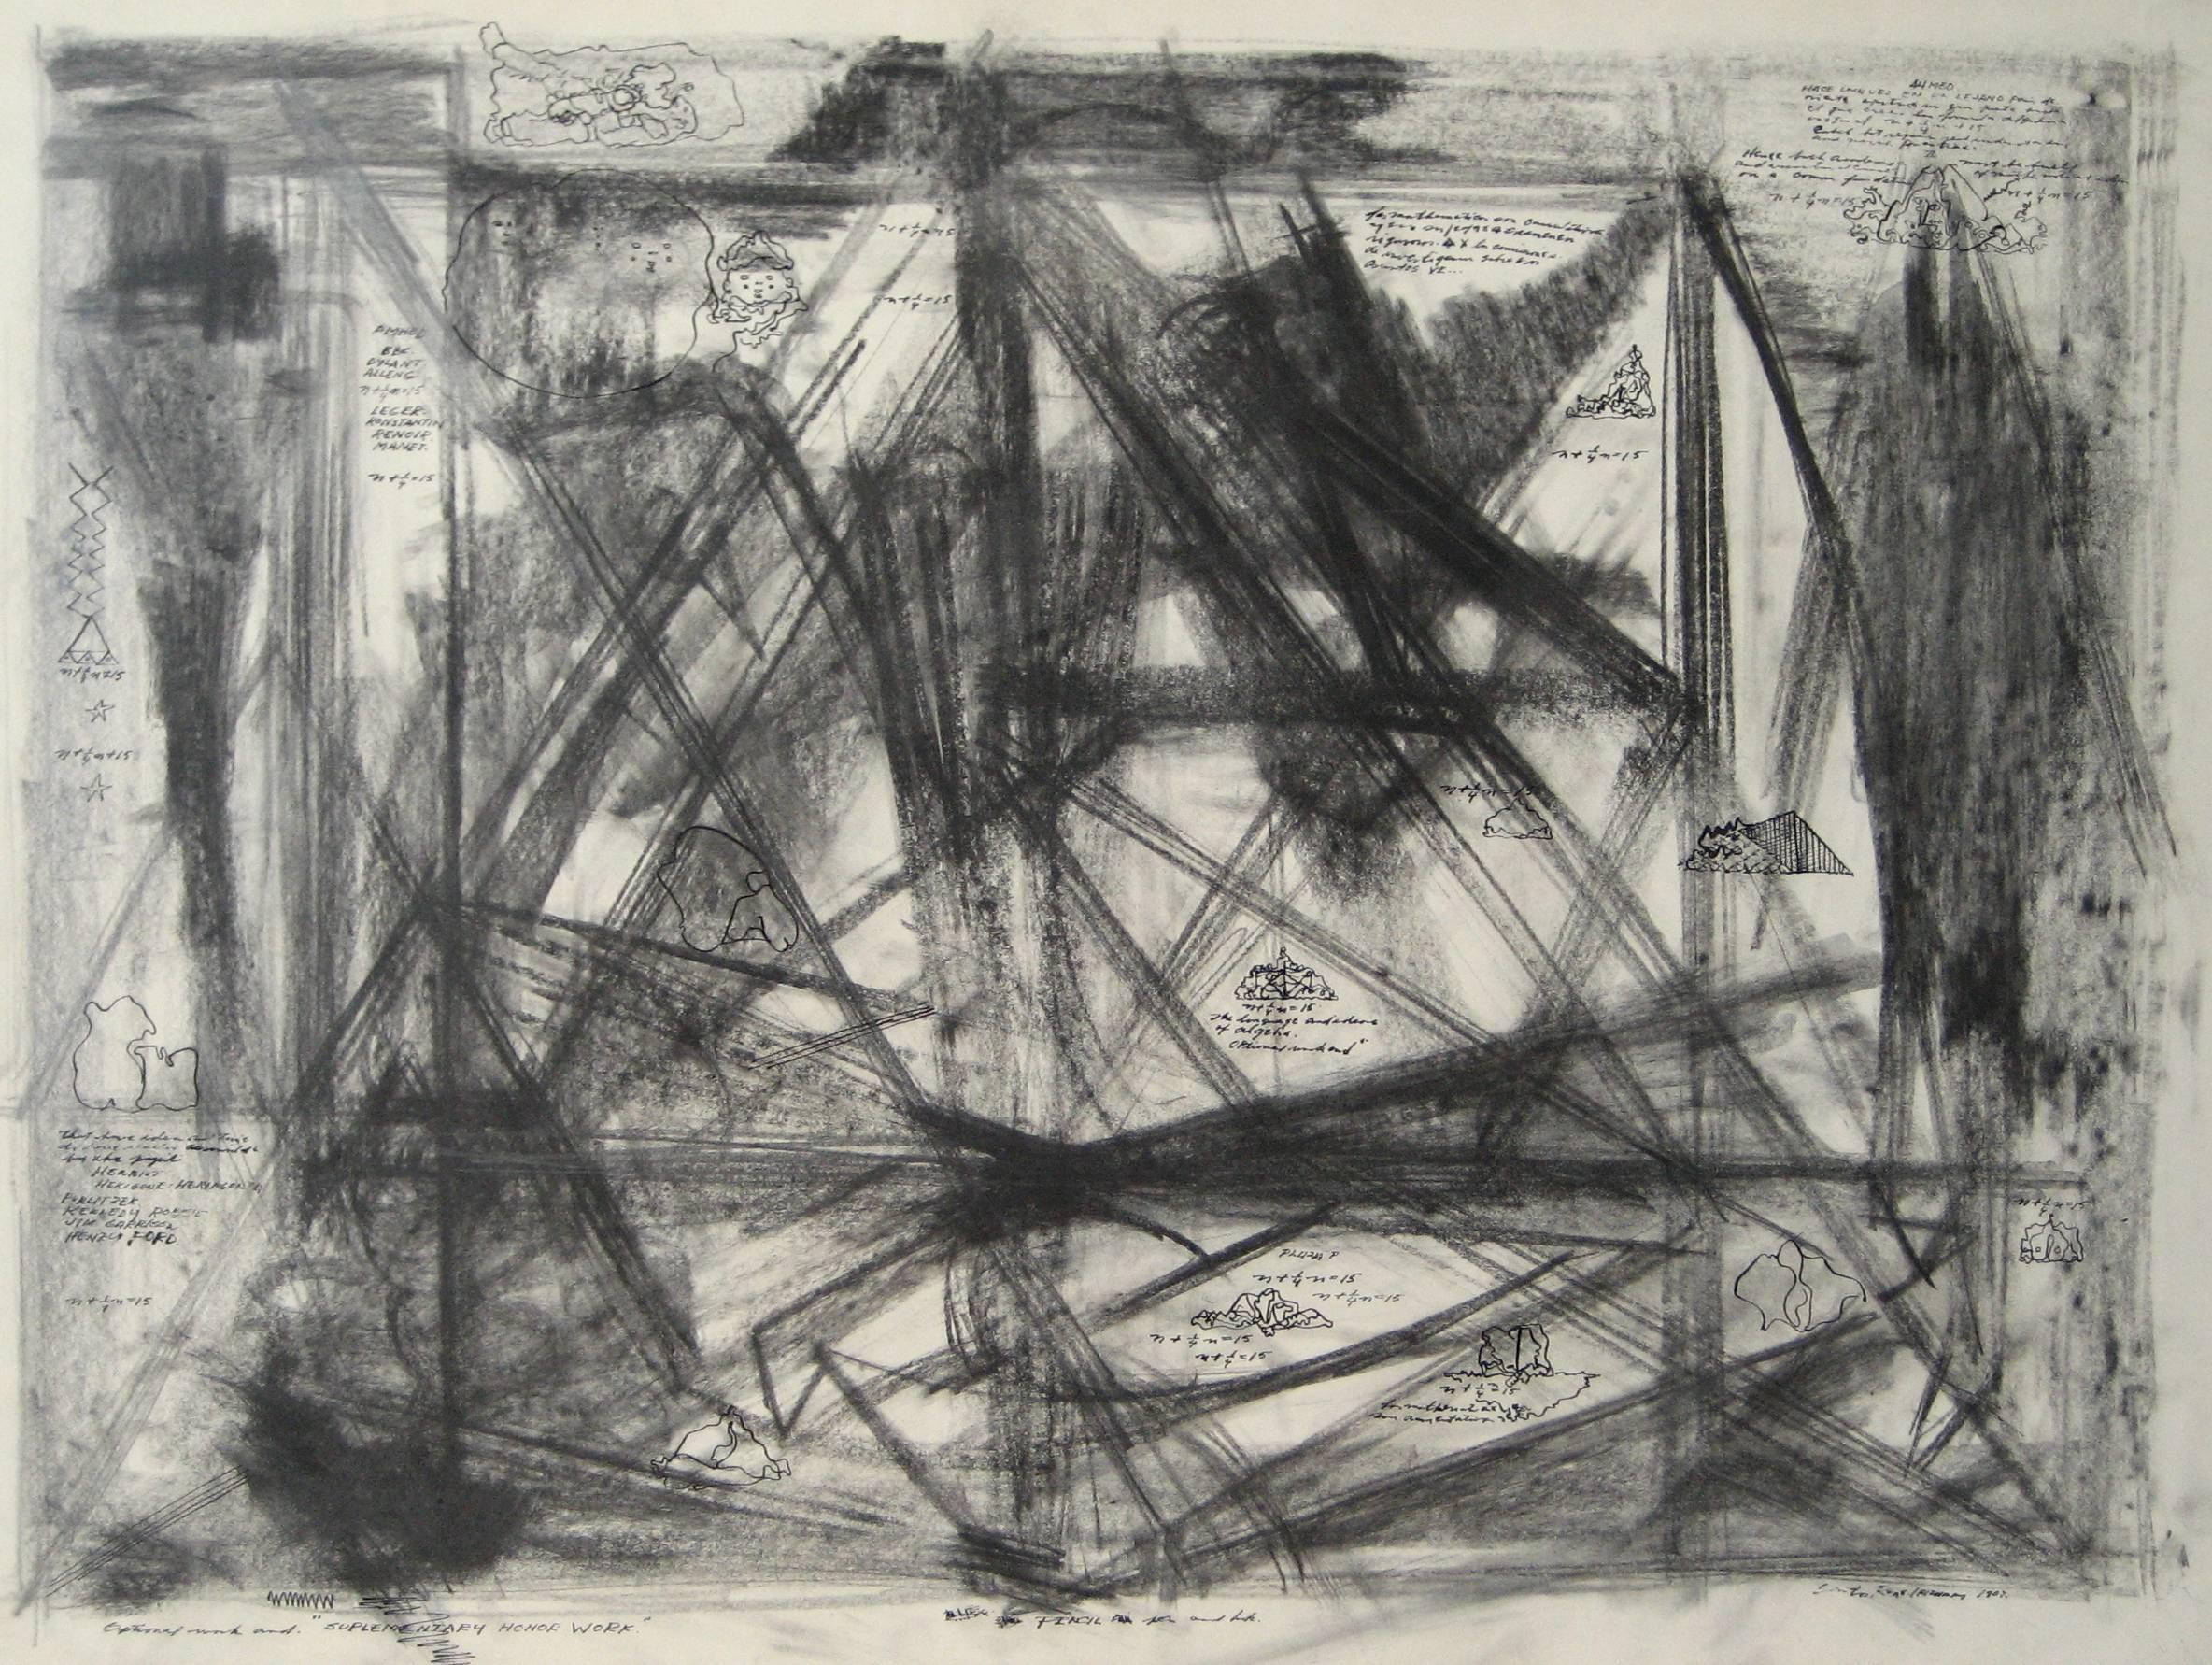 Santos Rene Irizarry Abstract Drawing - Monochromatic Modernist Abstract in Graphite, 1967